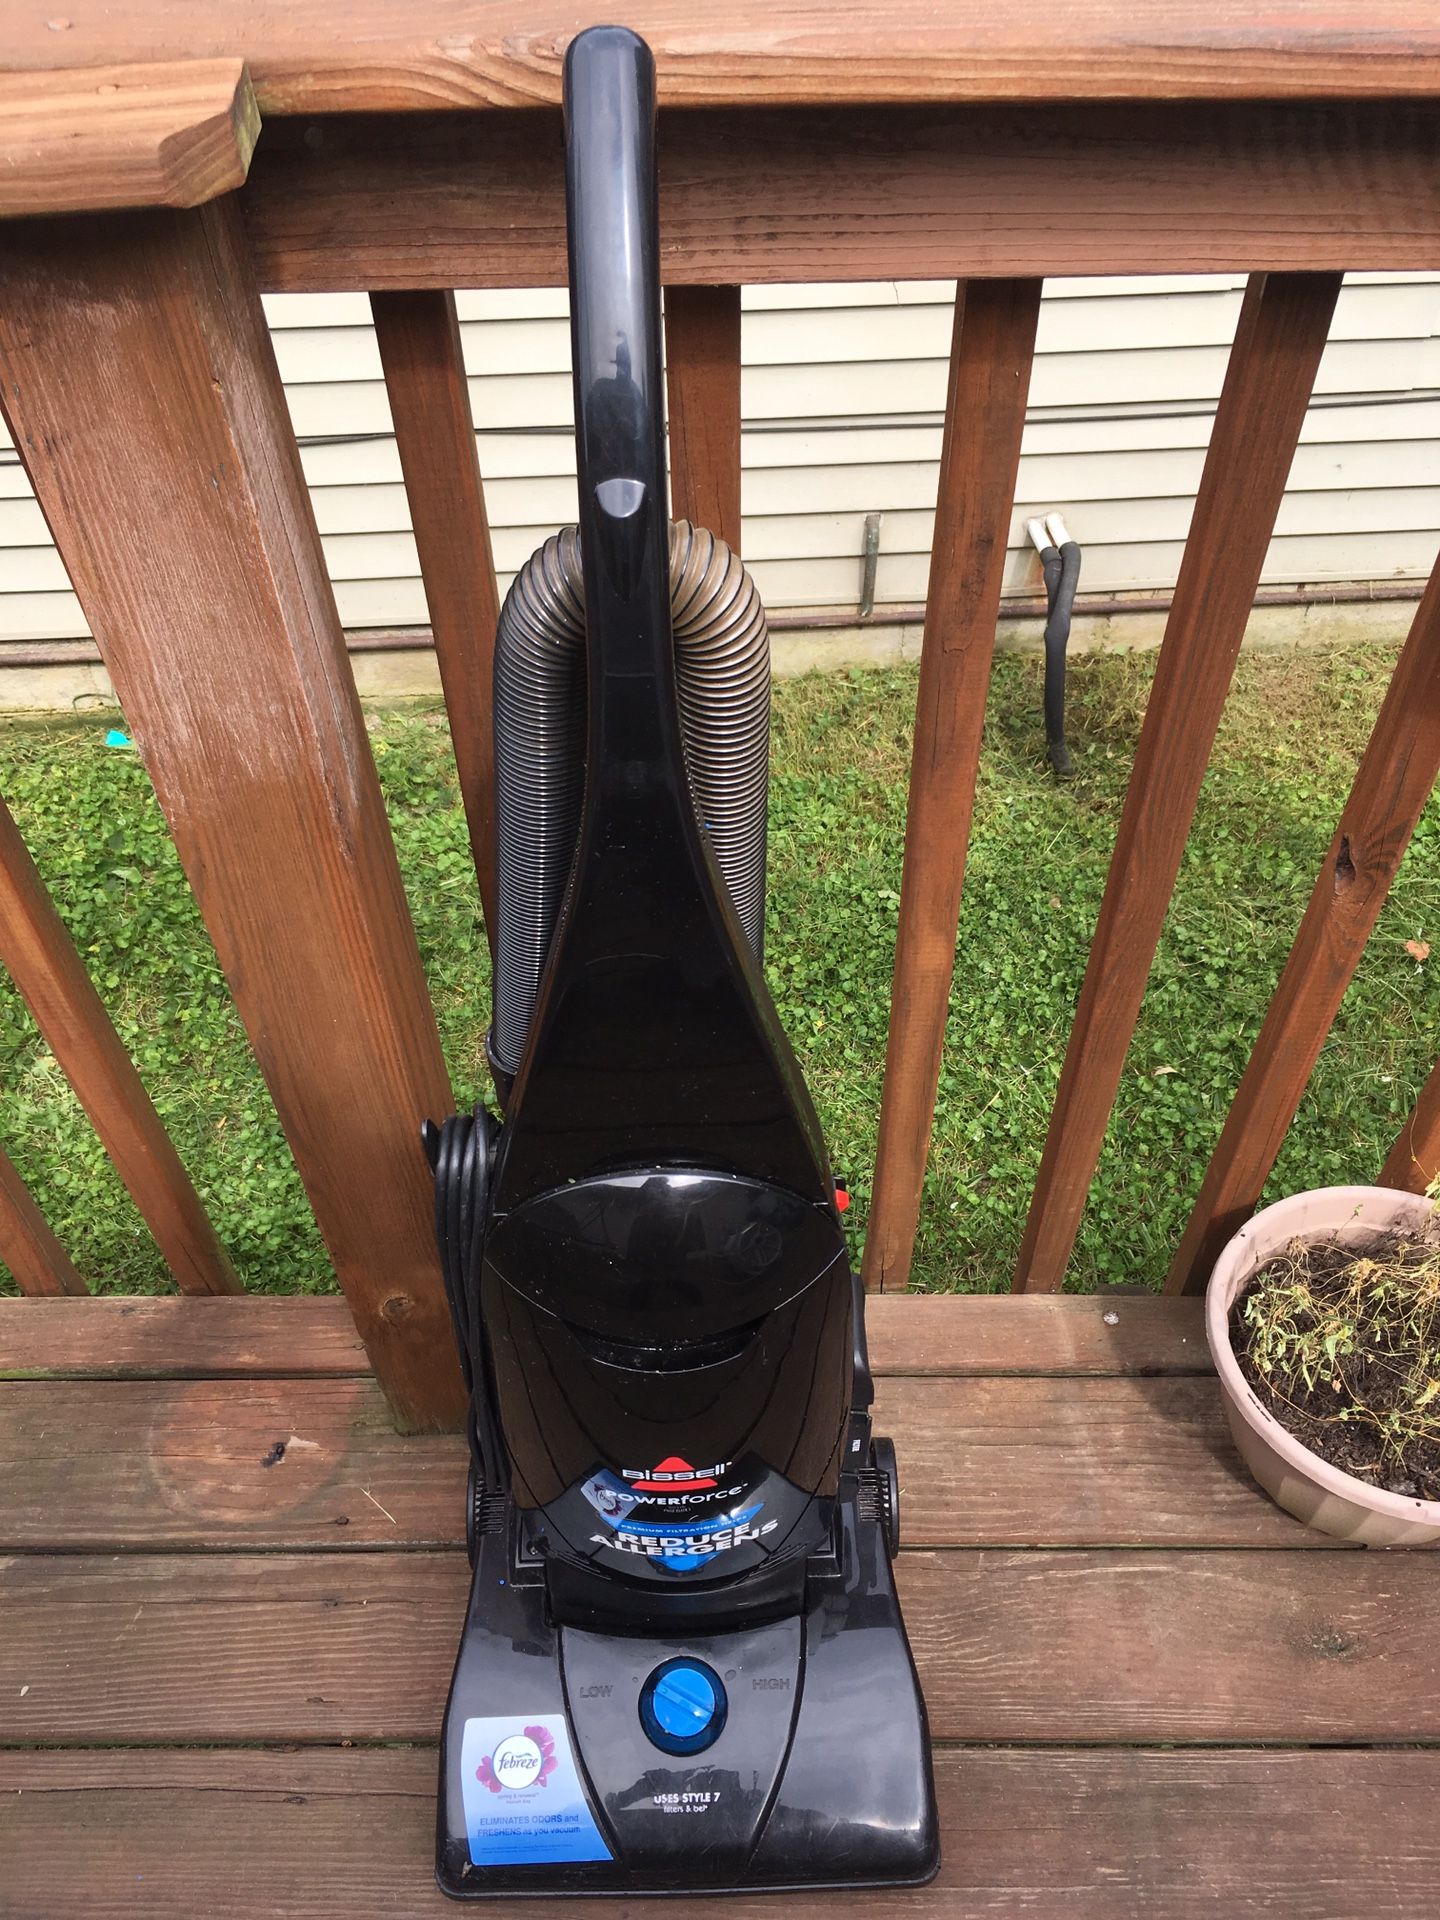 Vacuum cleaner good condition like new